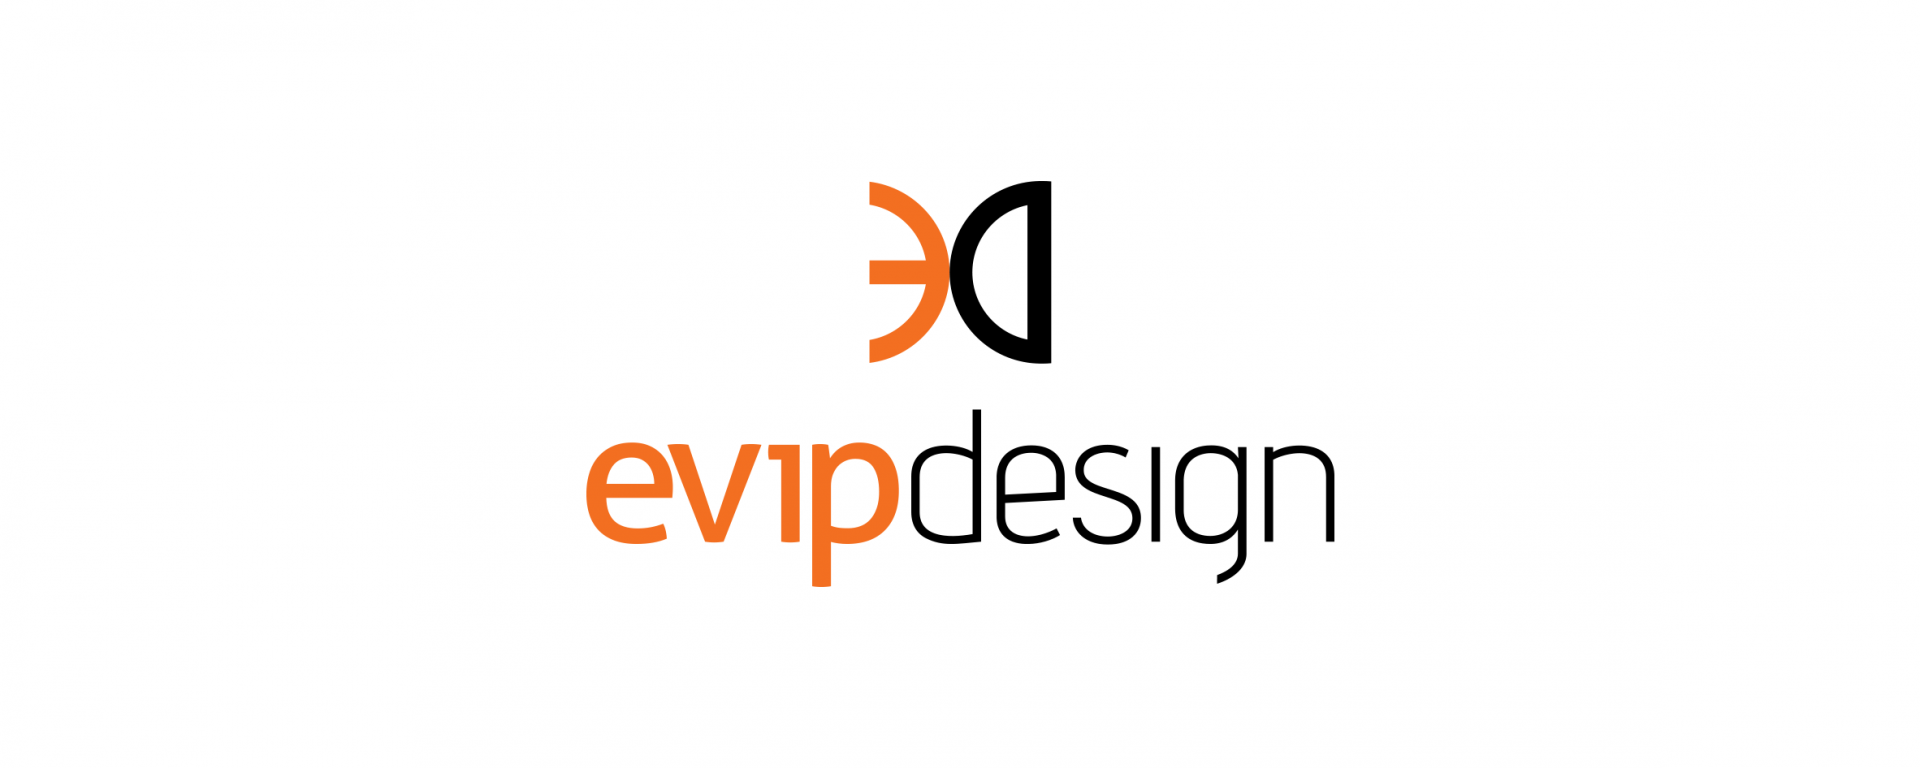 evipdesign.png